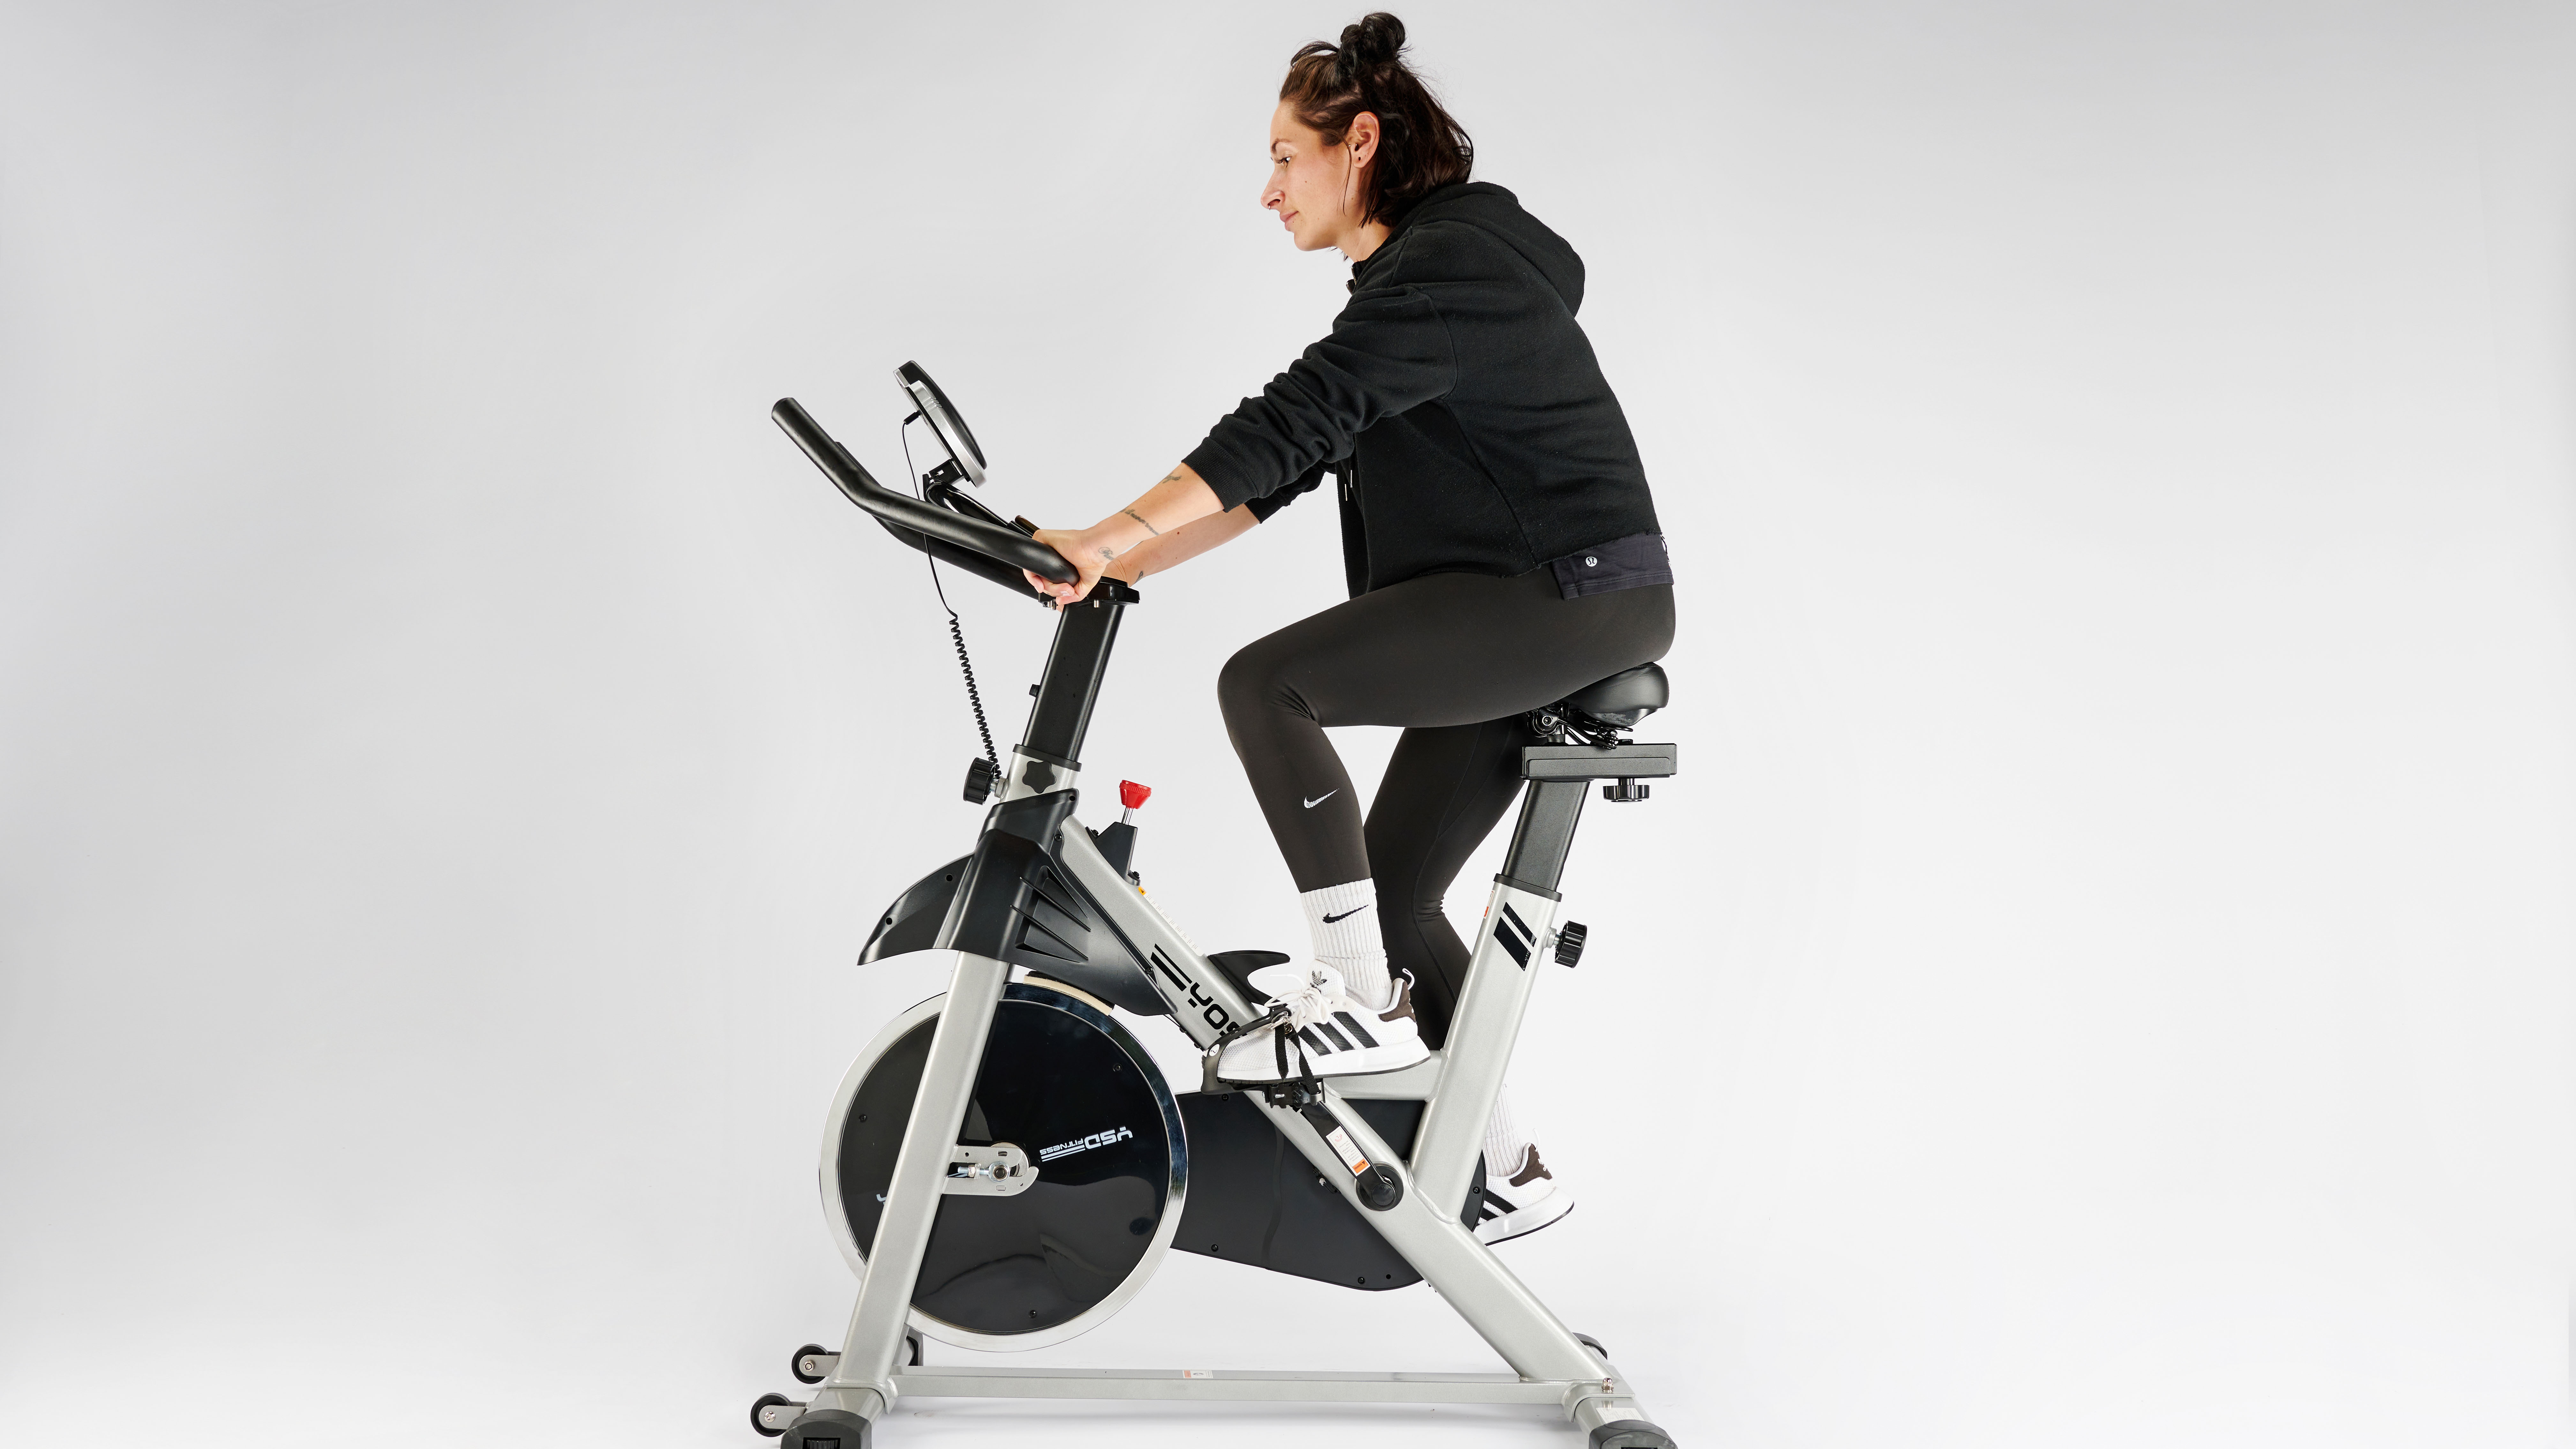 This Yosuda exercise bike is one of our favorites and it's cheaper than ever for Black Friday